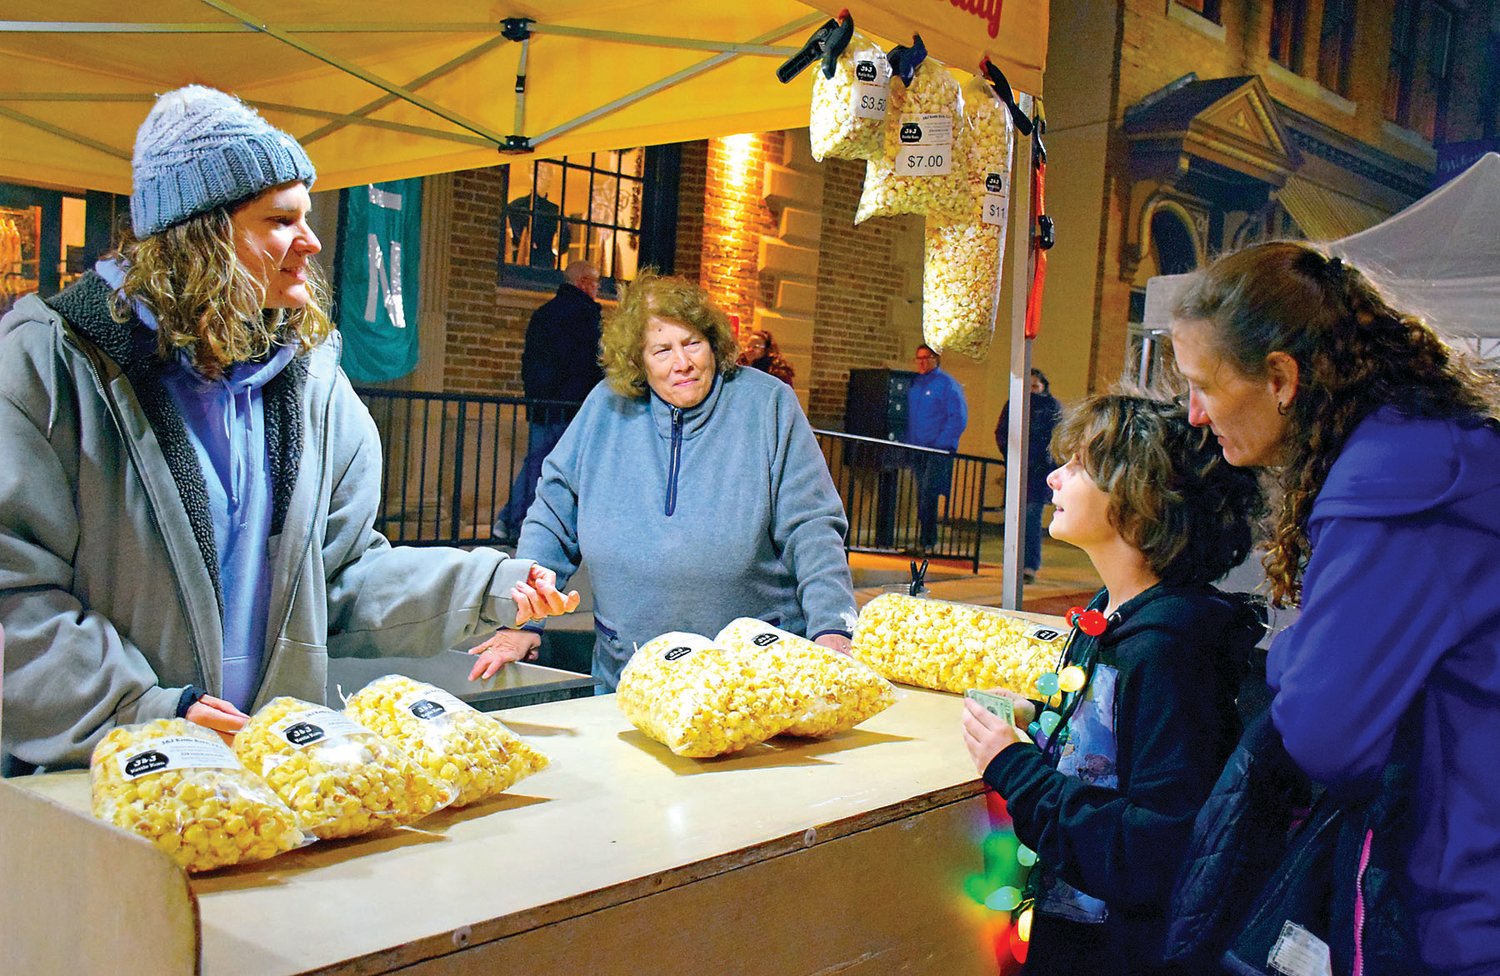 Kristin Barrett and Janet Seip of J&J Kettle Korn share their kettle corn with Julie and Kierra Cassel of Quakertown.